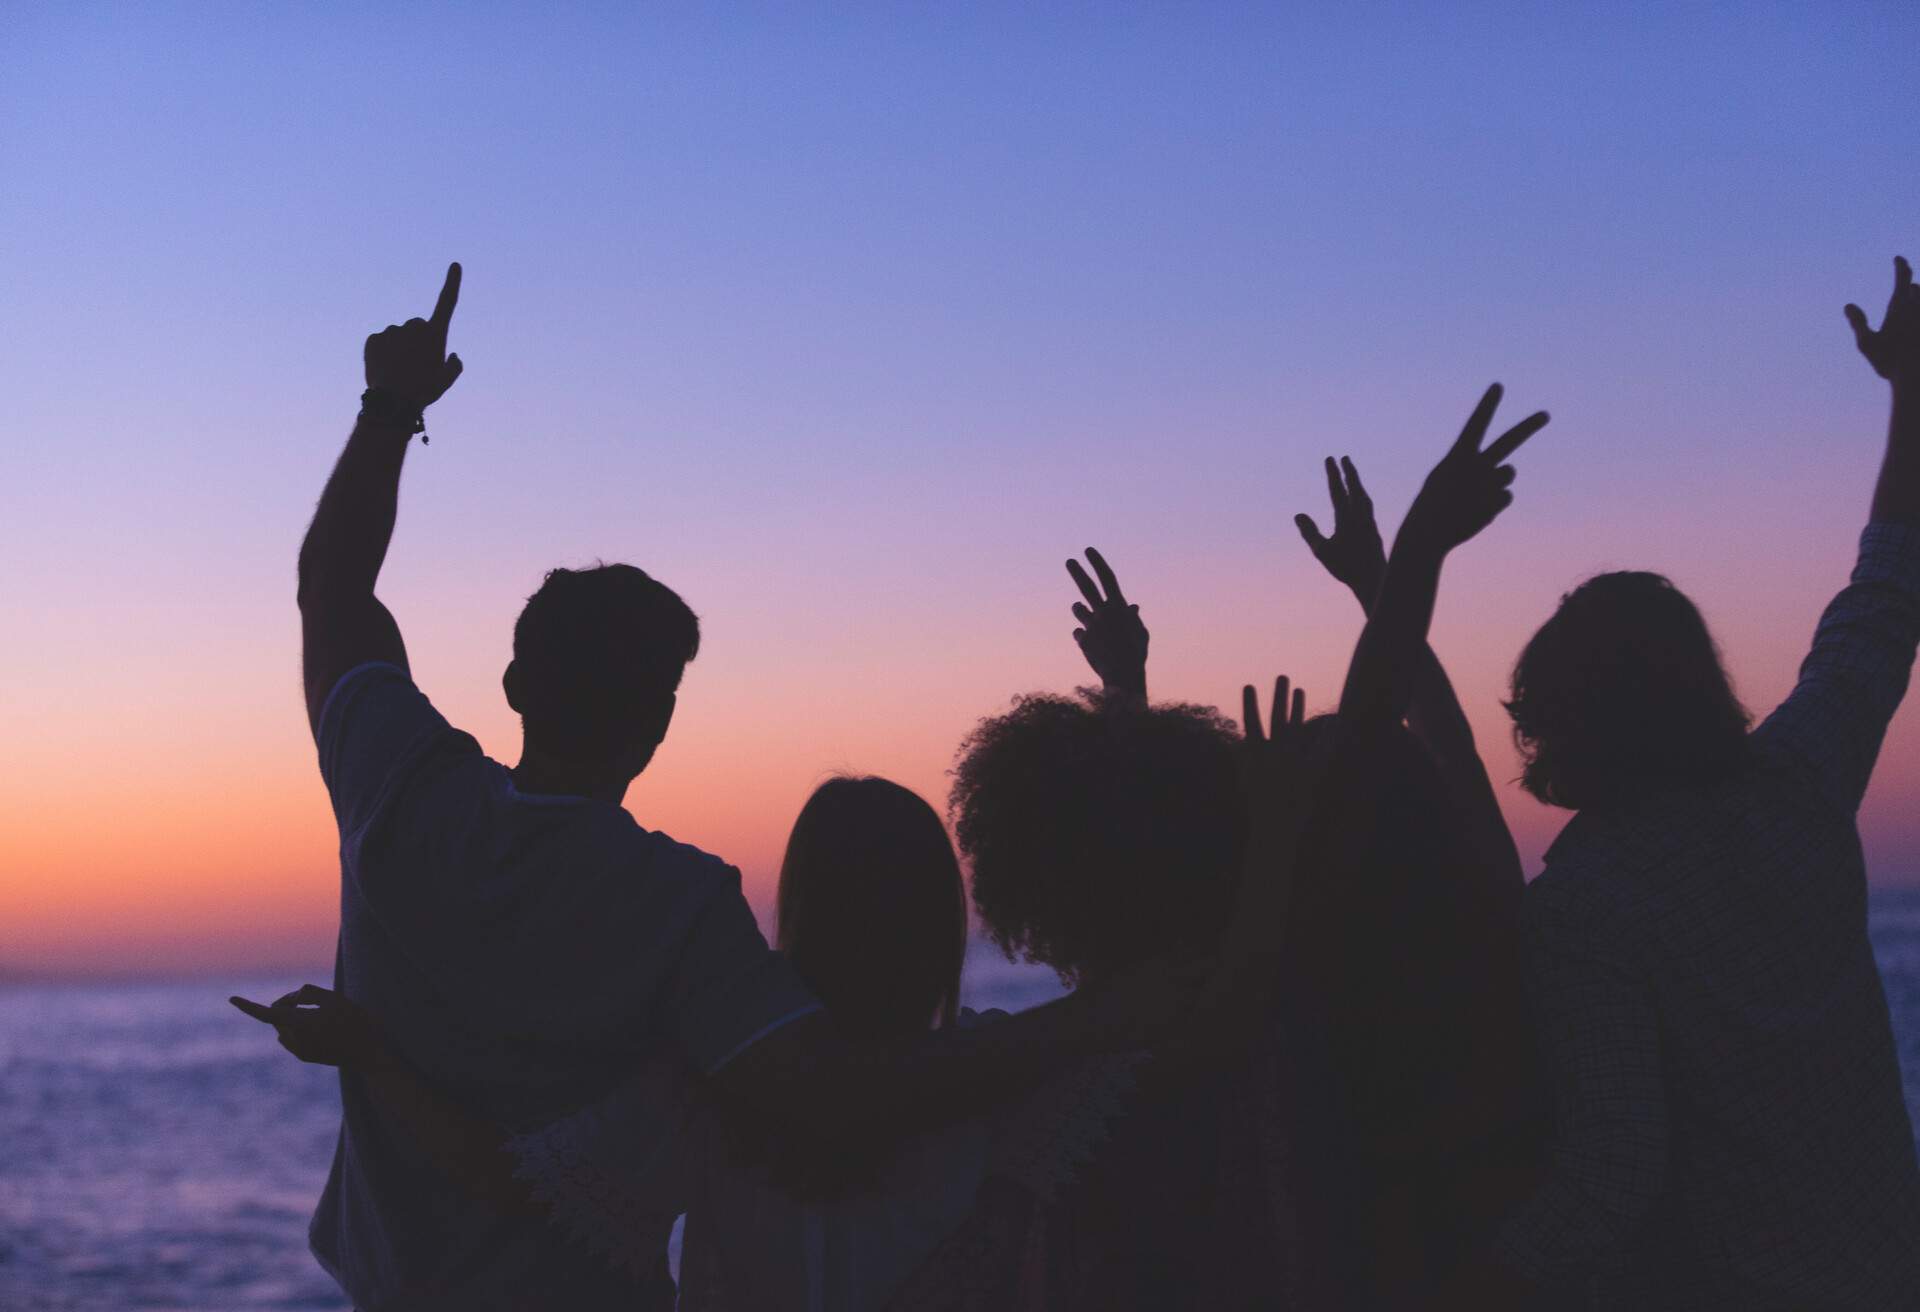 Group of people partying on the beach at sunset or sunrise. They have their arms raised in celebration. Backlit silhouette with copy space